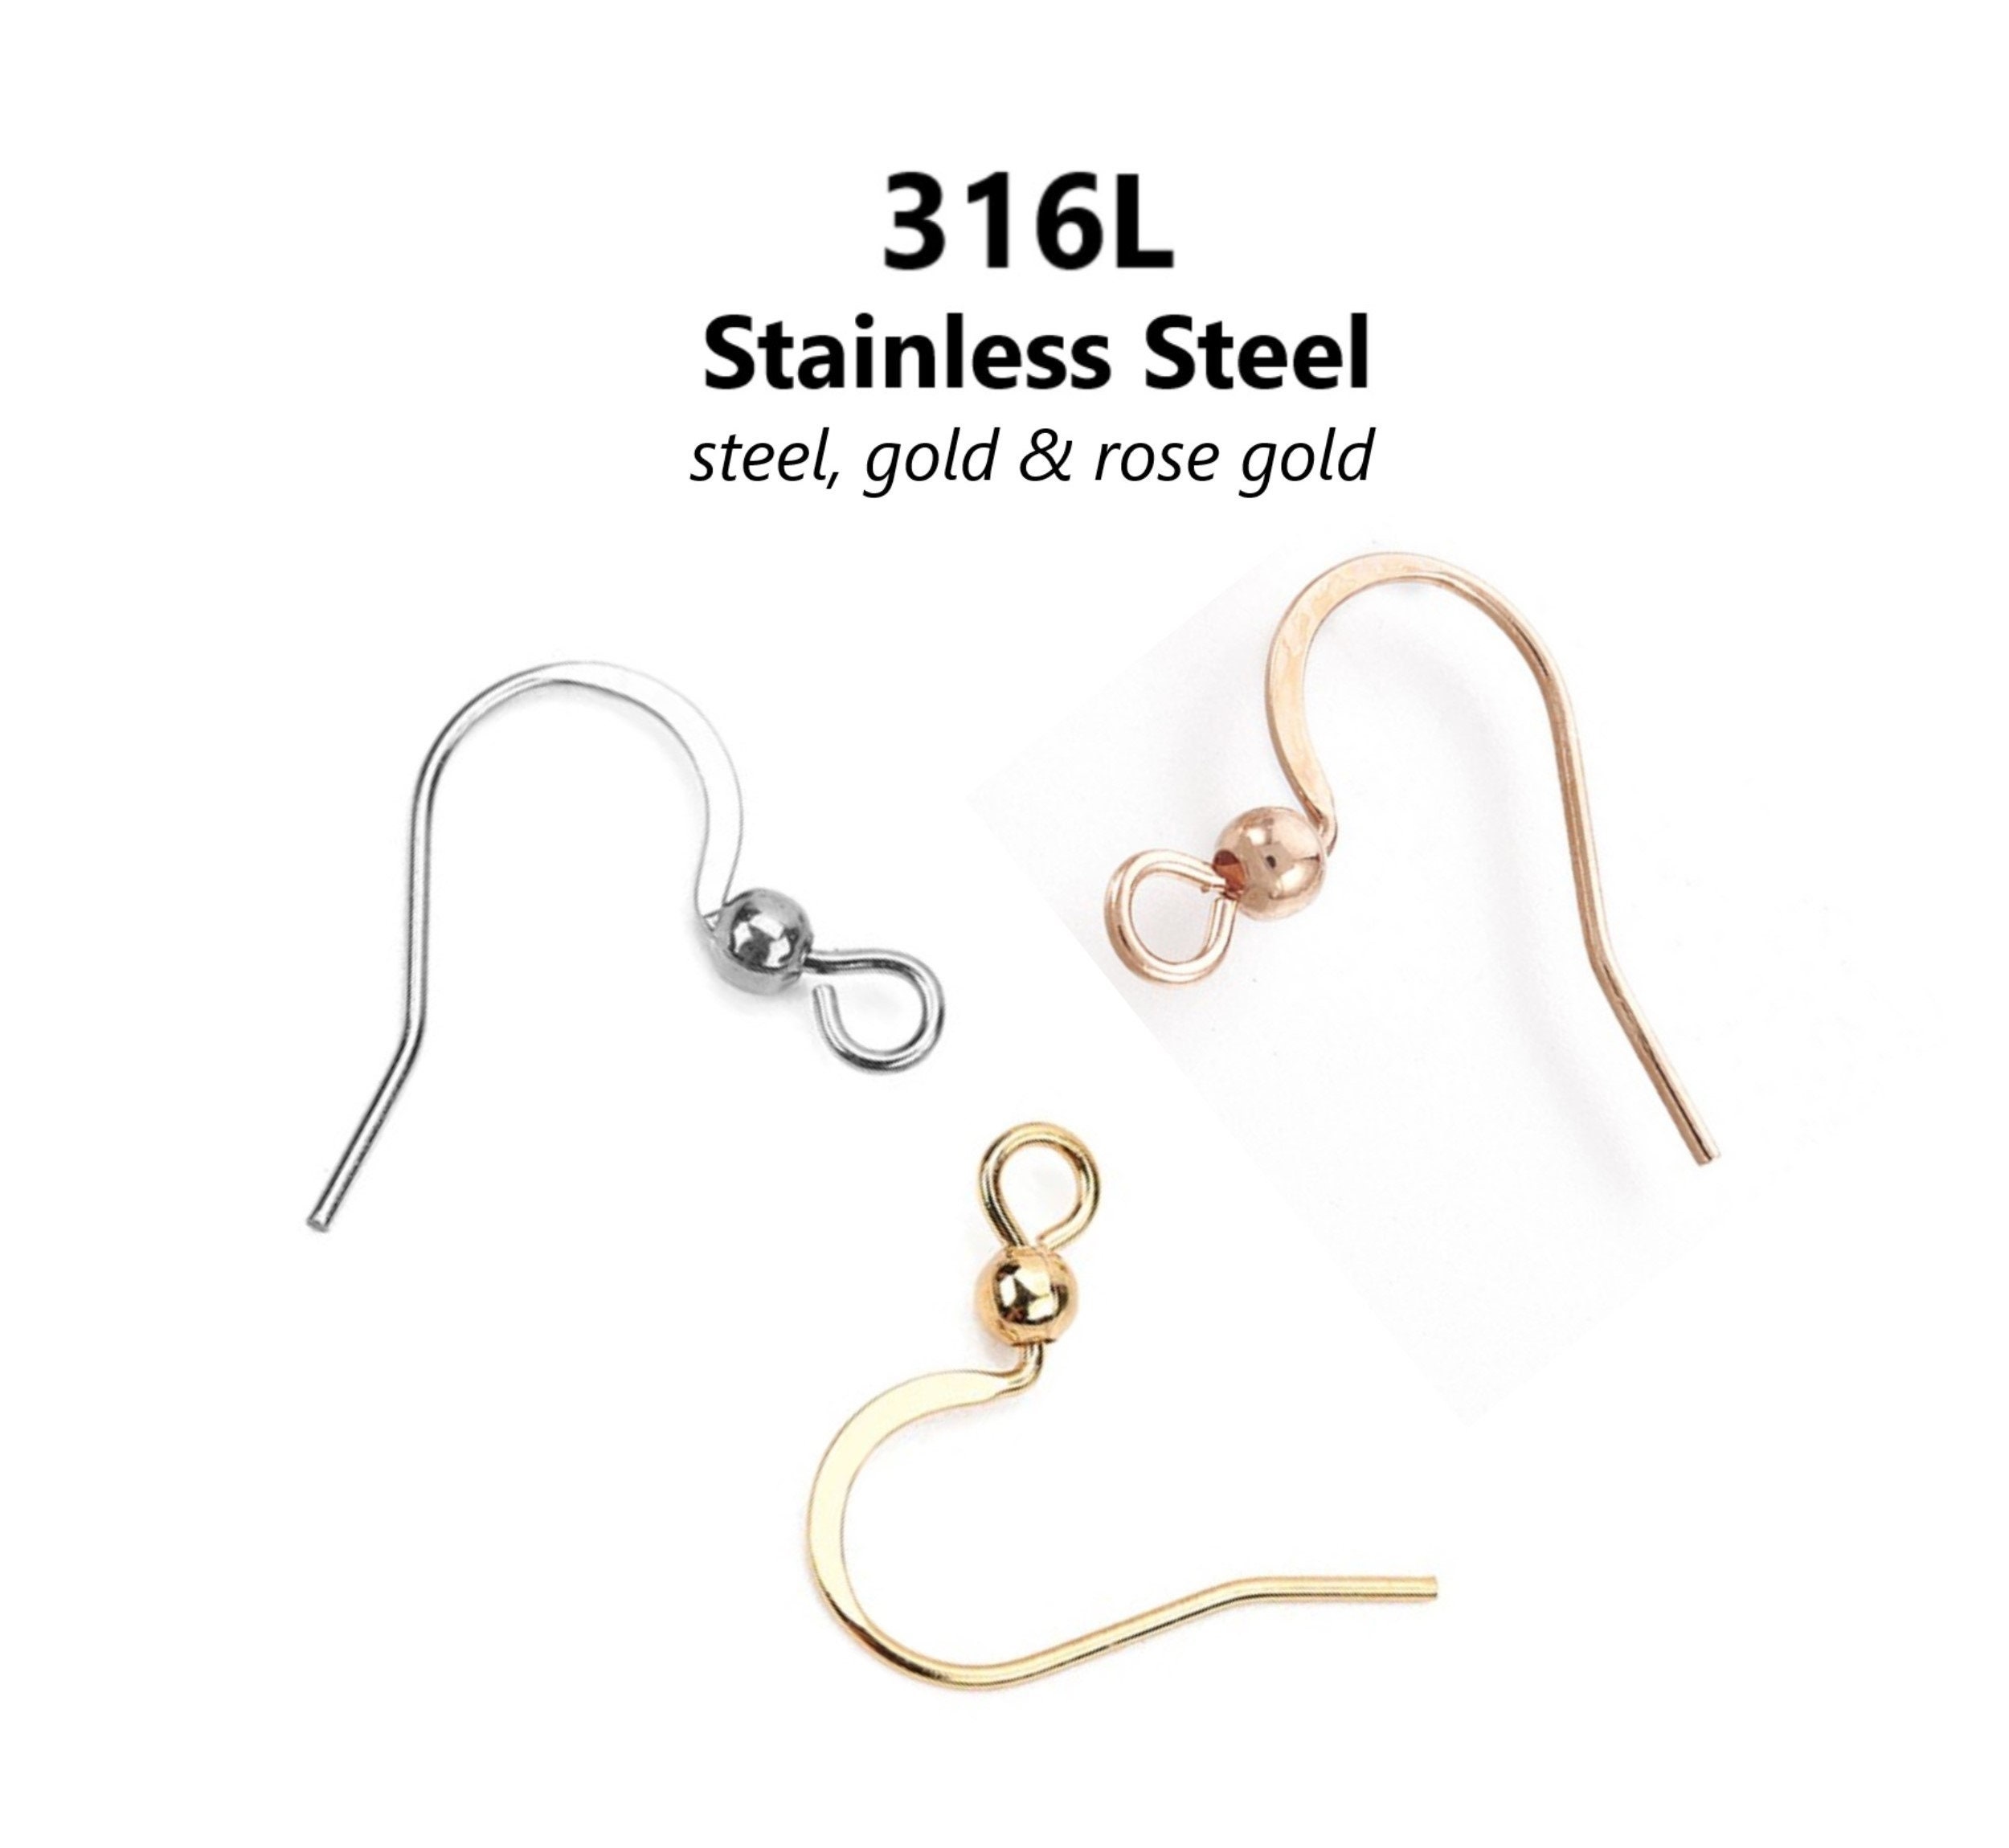 100 pcs Gold Plated Earring Hooks with Spring and Ball - 19mm x 17mm -  Perpendicular Loop